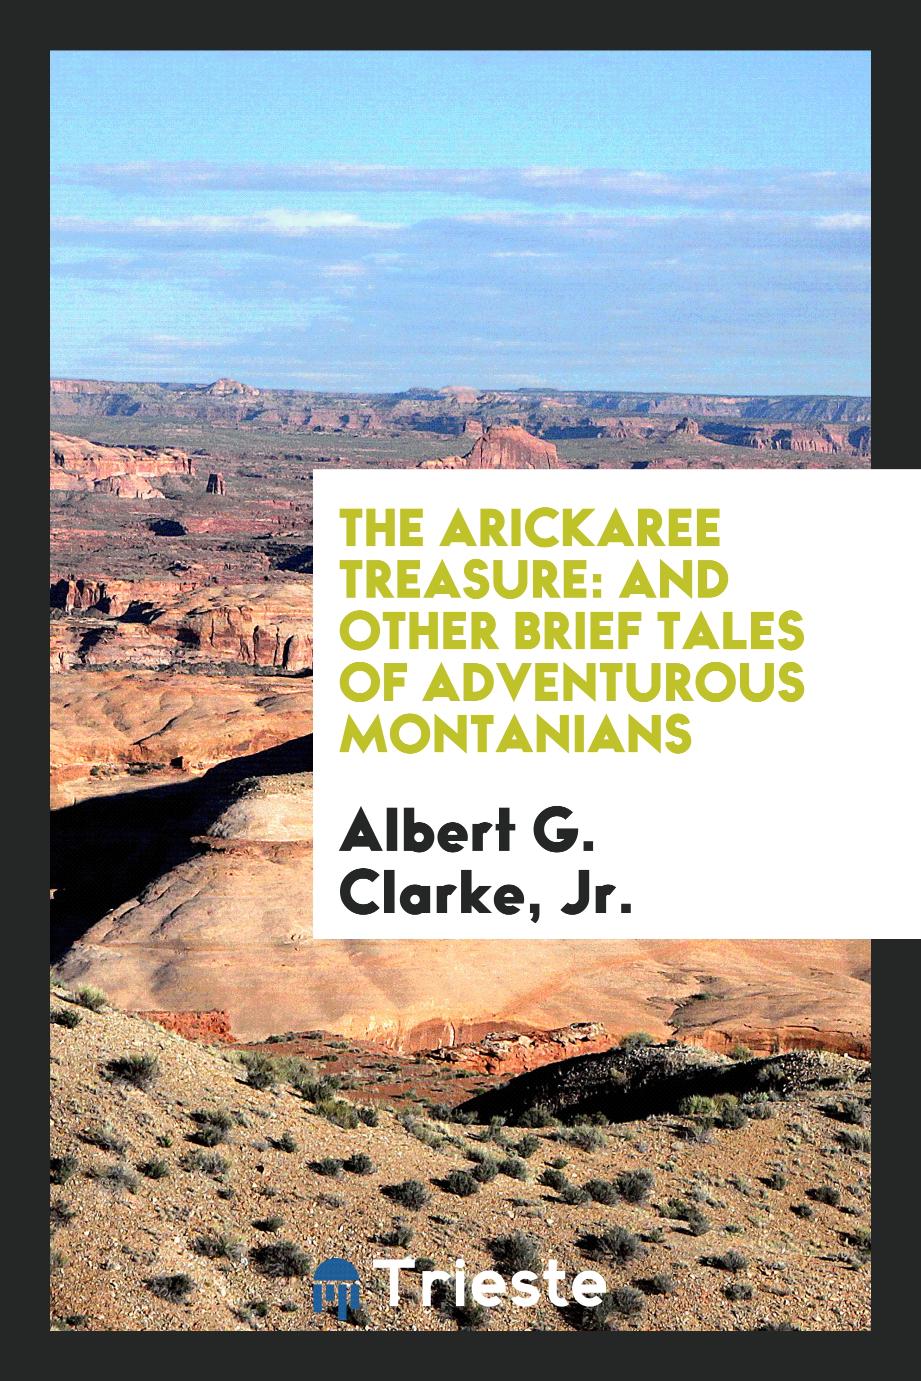 The Arickaree Treasure: And Other Brief Tales of Adventurous Montanians